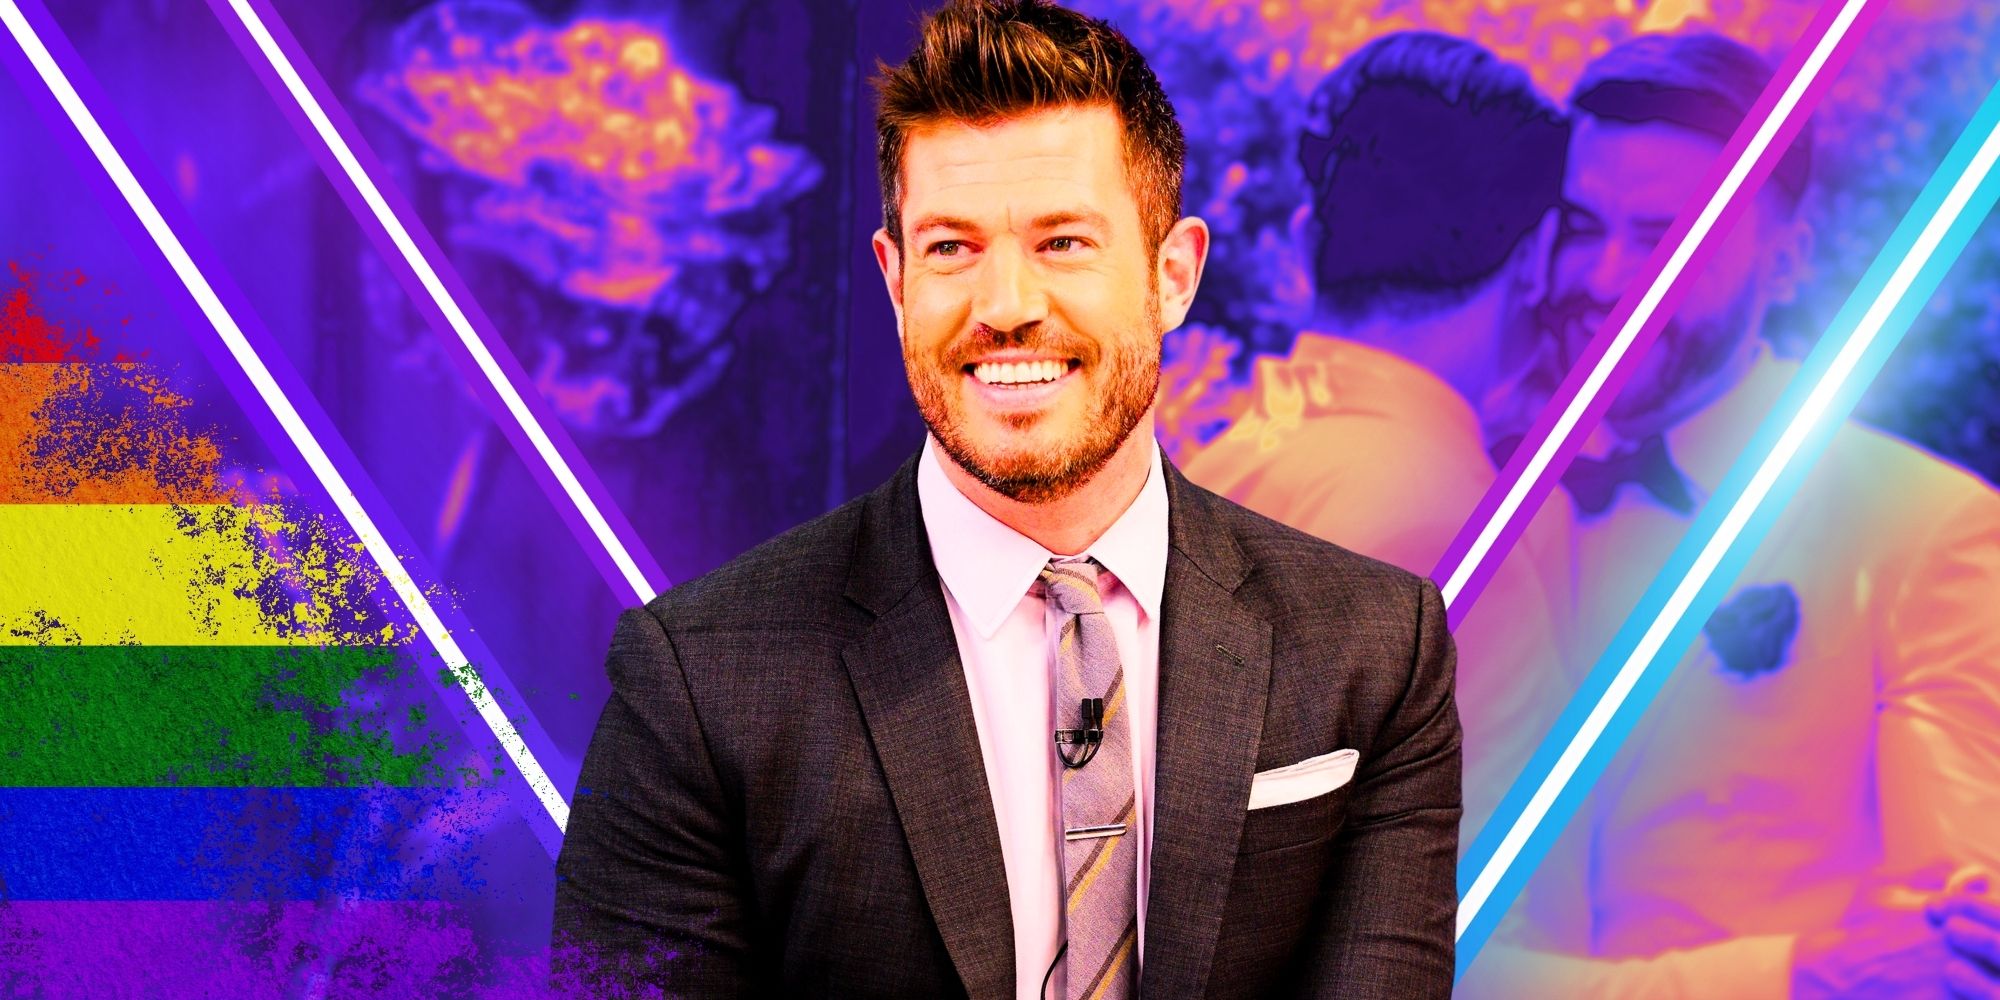 The Bachelor host Jesse Palmer, with Pride flag